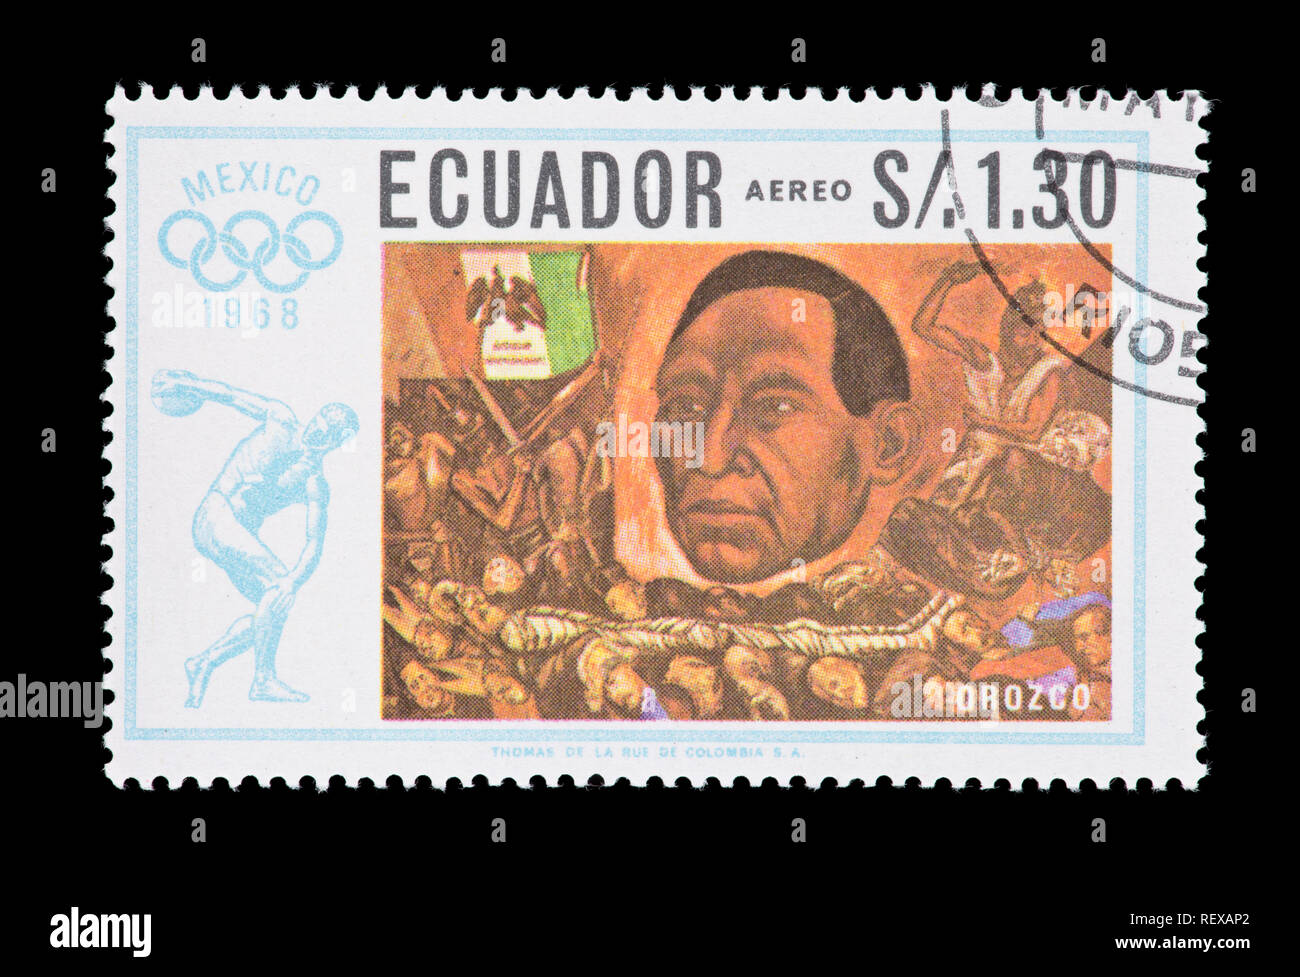 Postage stamp from Ecuador depicting native art (Orozco painting President Juarez) for the 1968 Mexico City Olympics Stock Photo